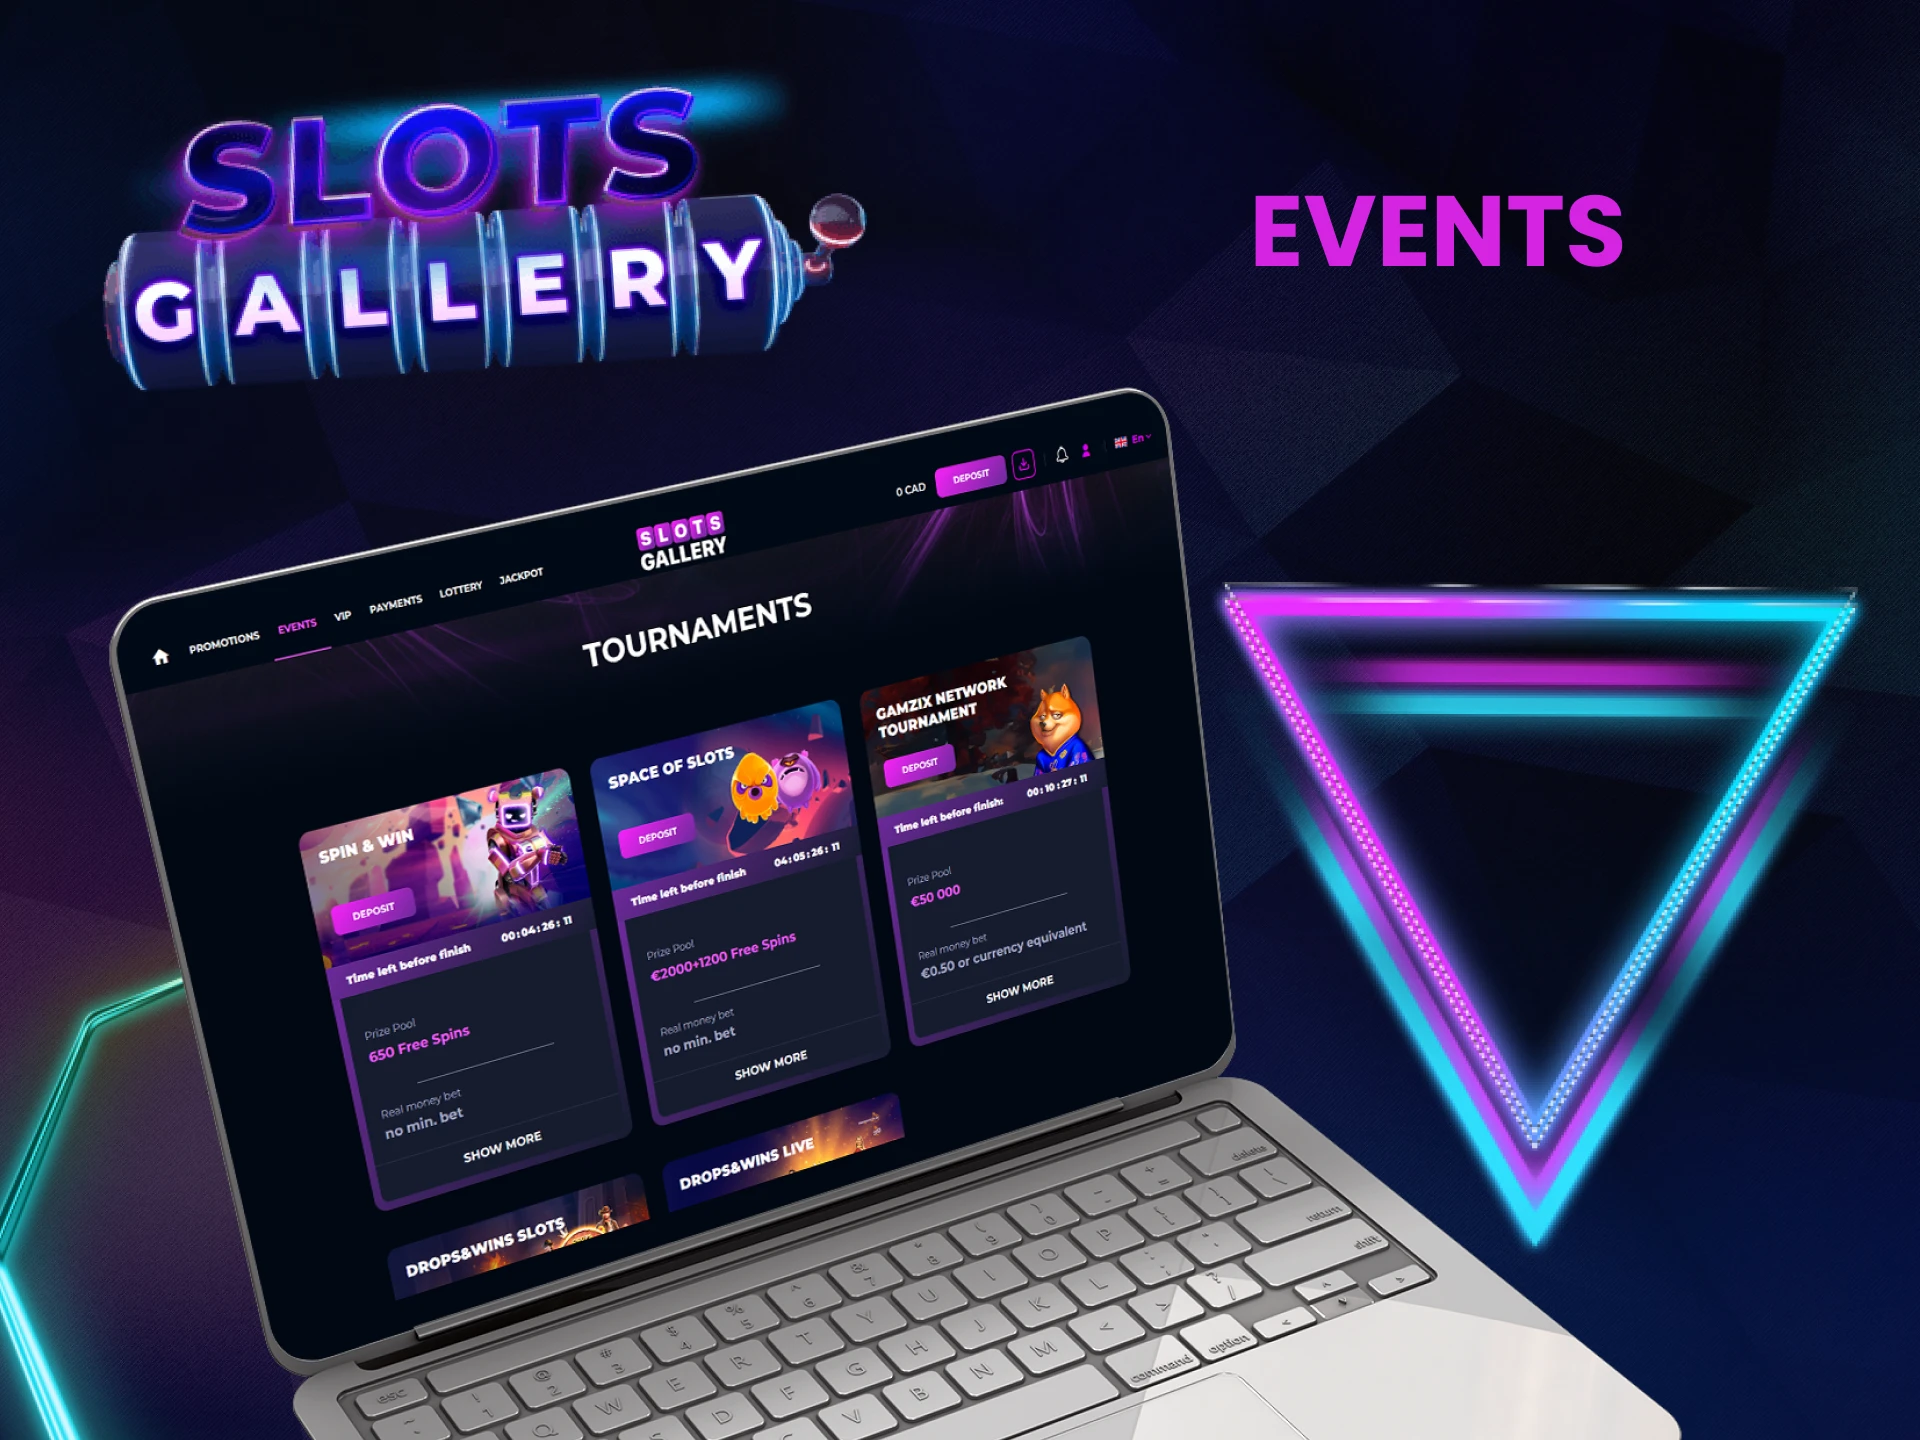 We will tell you about the events that are on SlotsGallery.